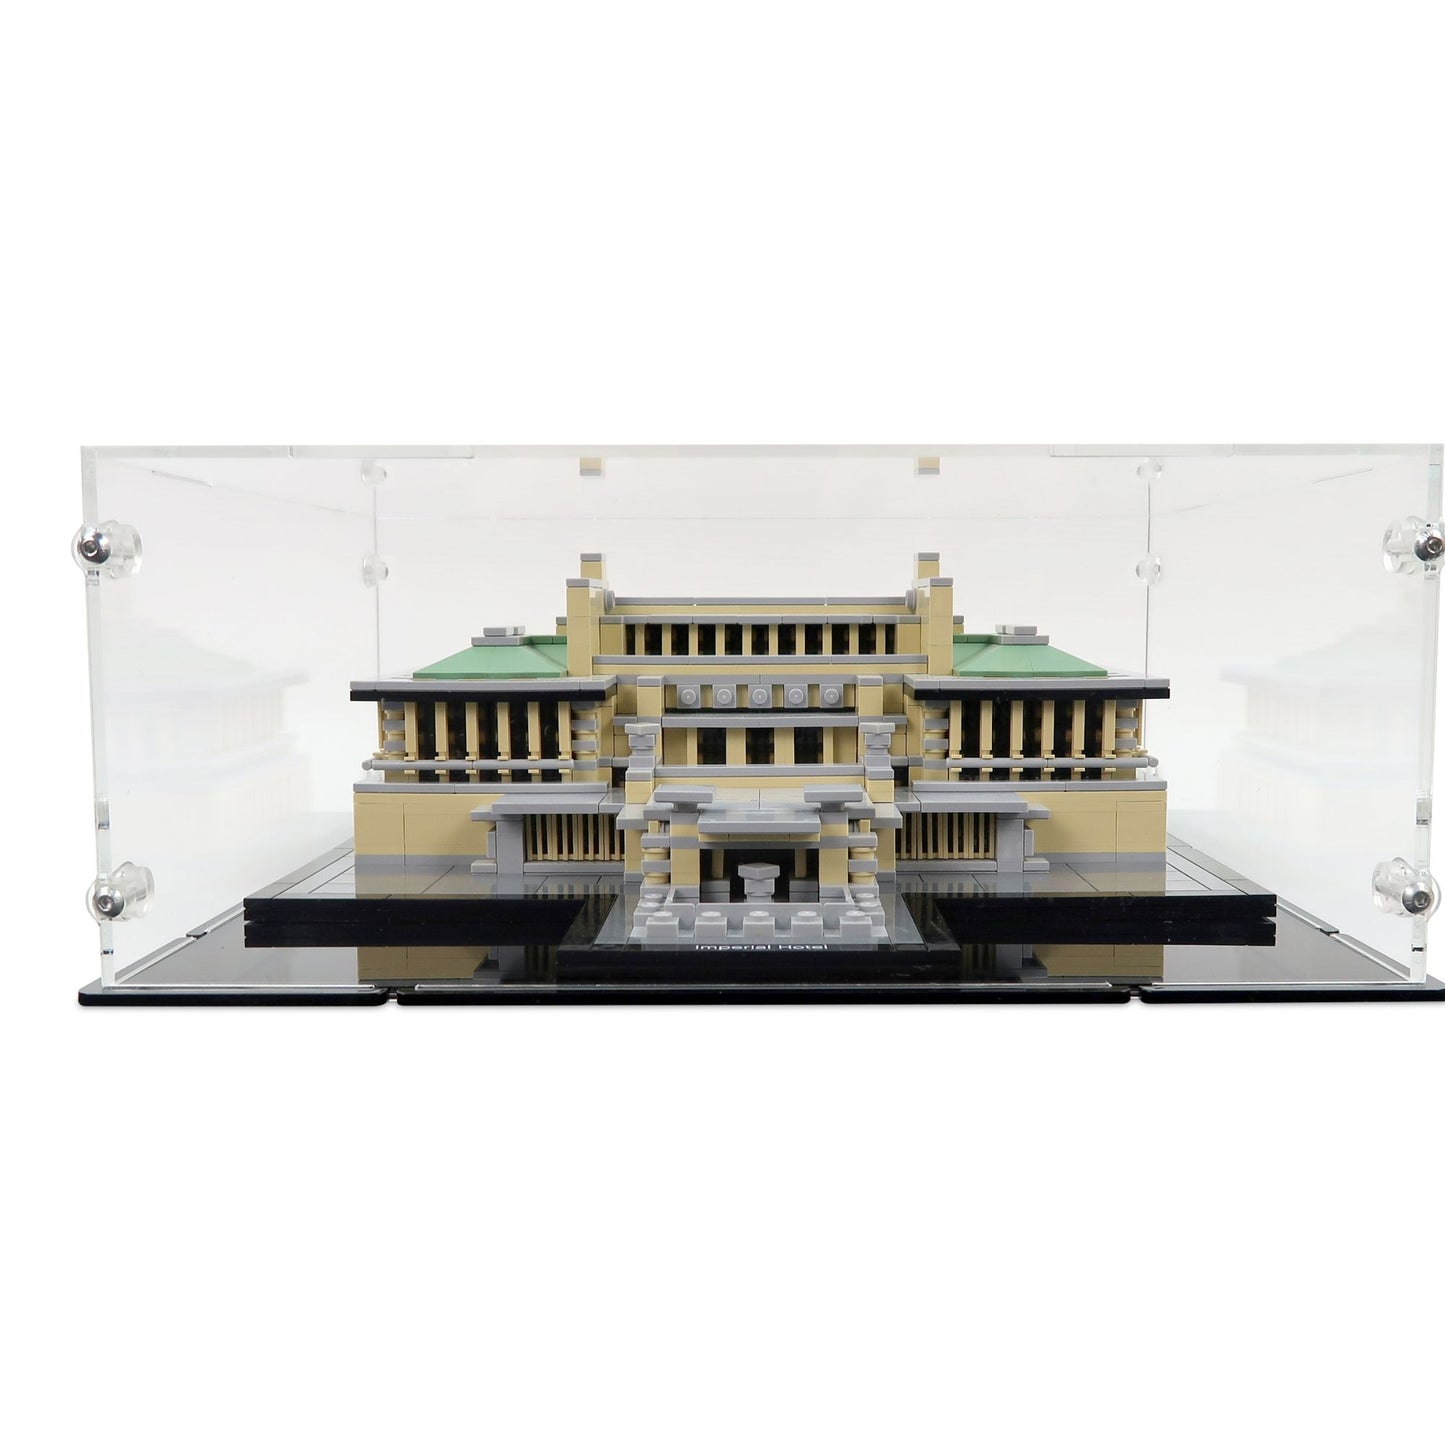 21017 Imperial Hotel Display Case